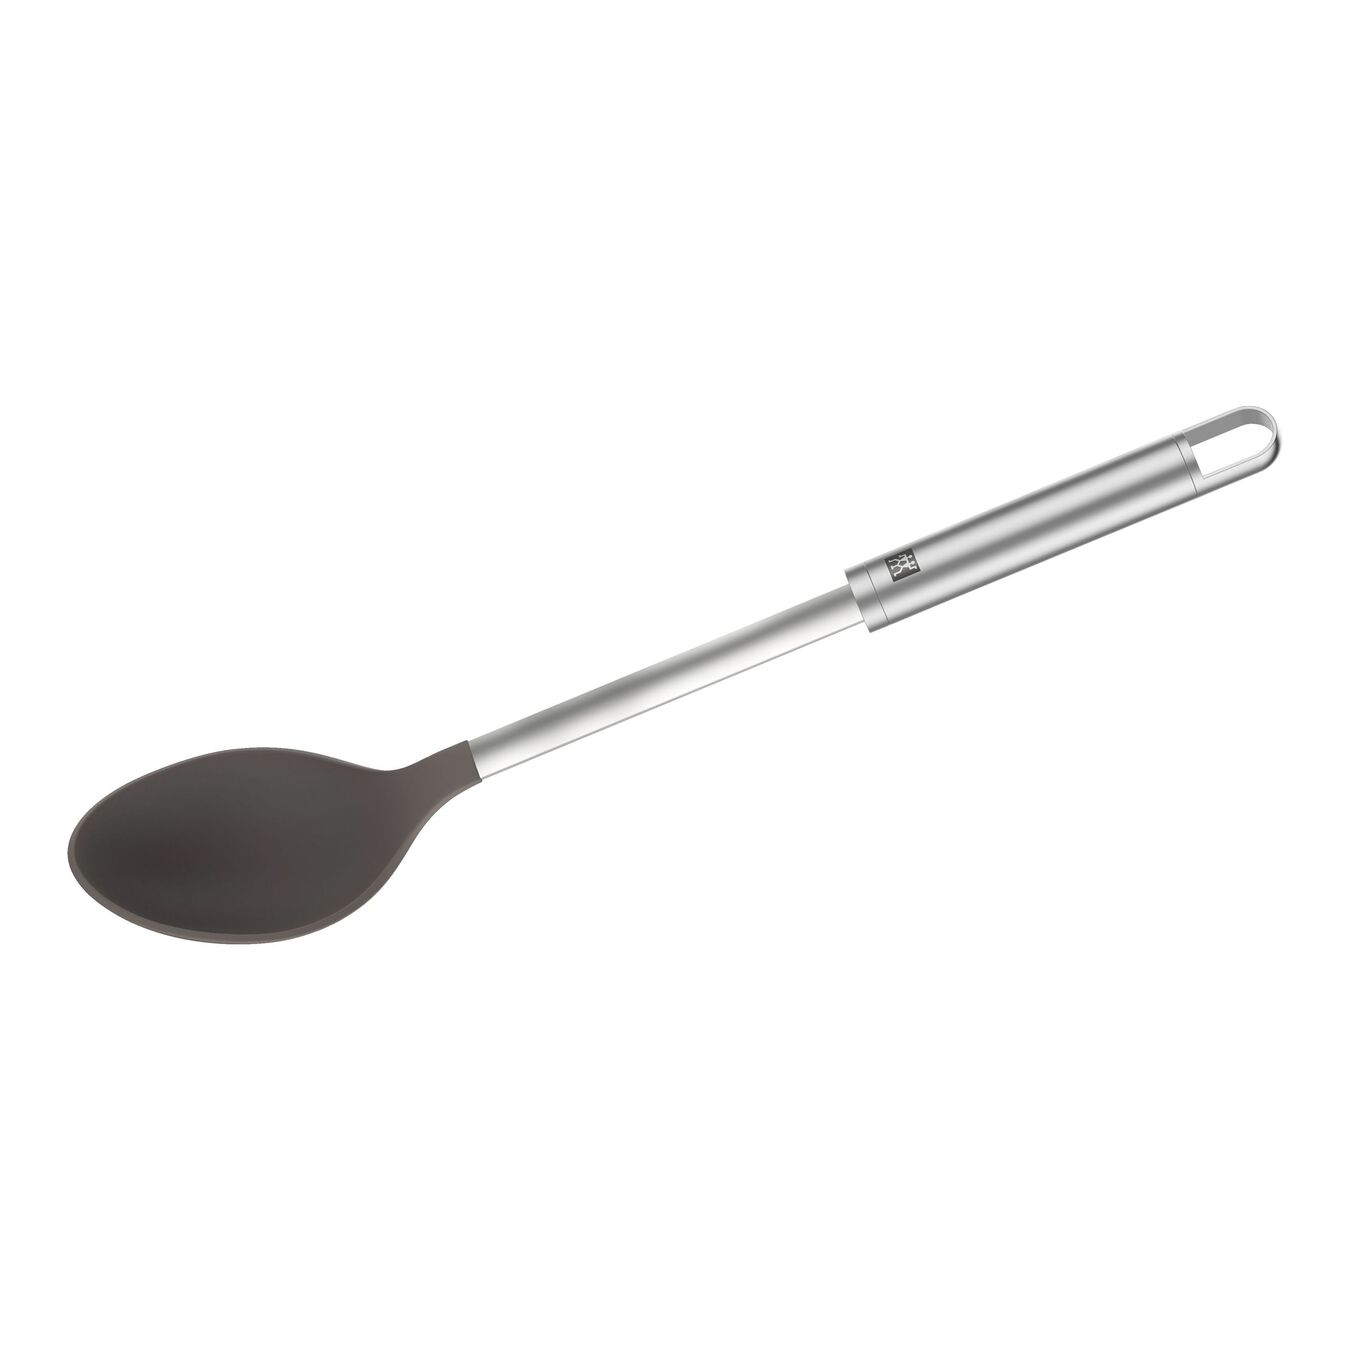 Serving spoon, 35 cm, silicone,,large 1